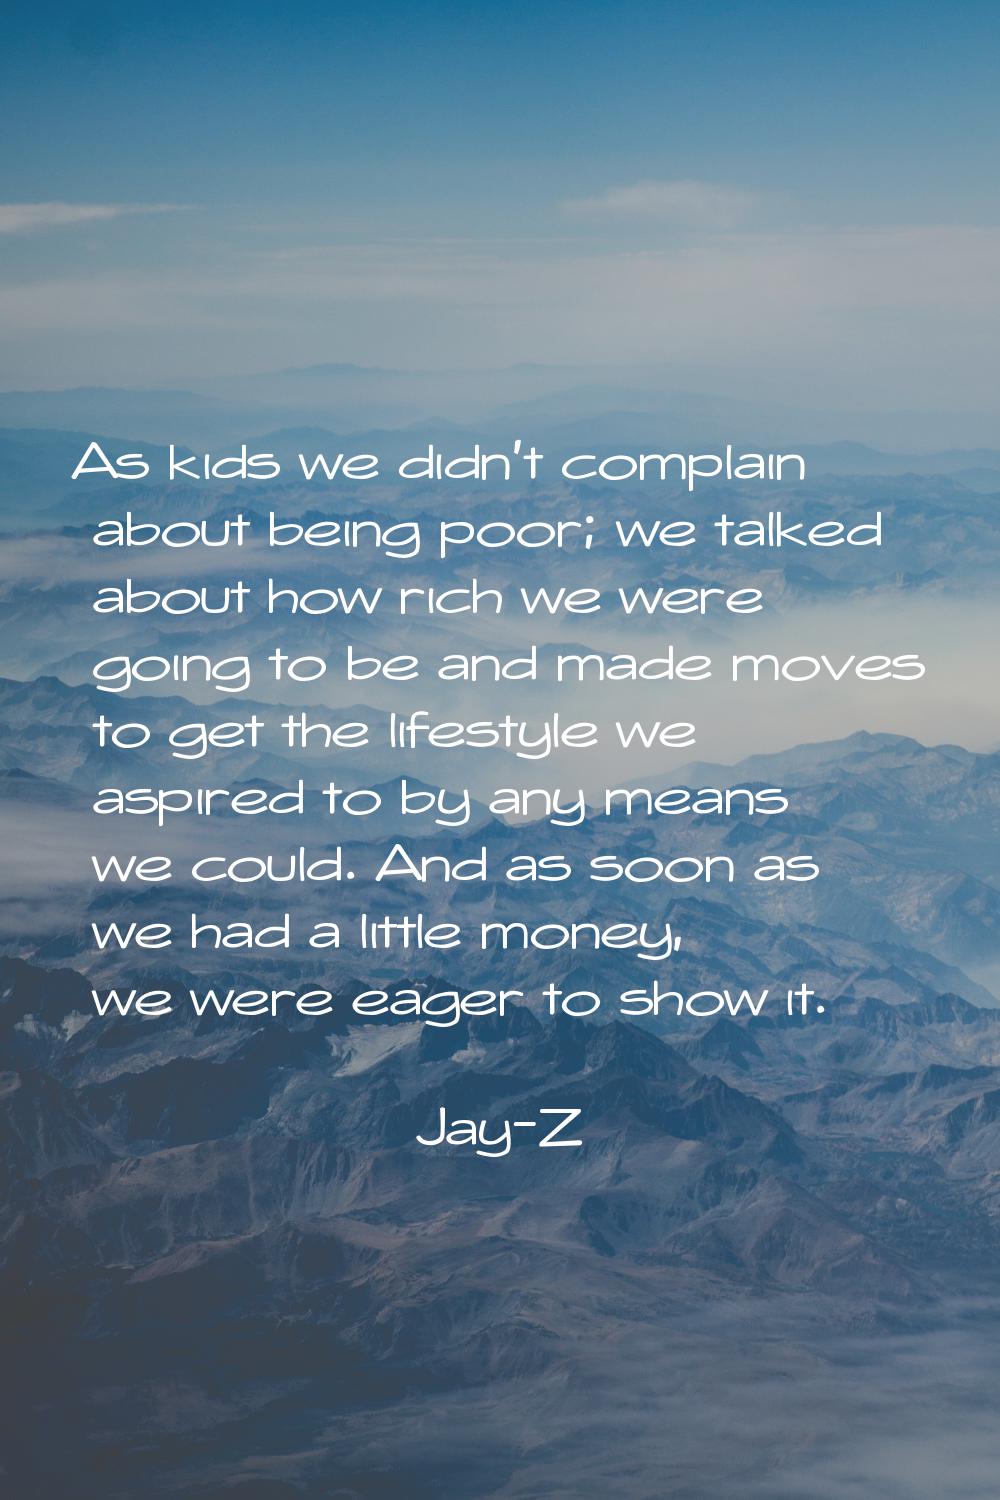 As kids we didn't complain about being poor; we talked about how rich we were going to be and made 